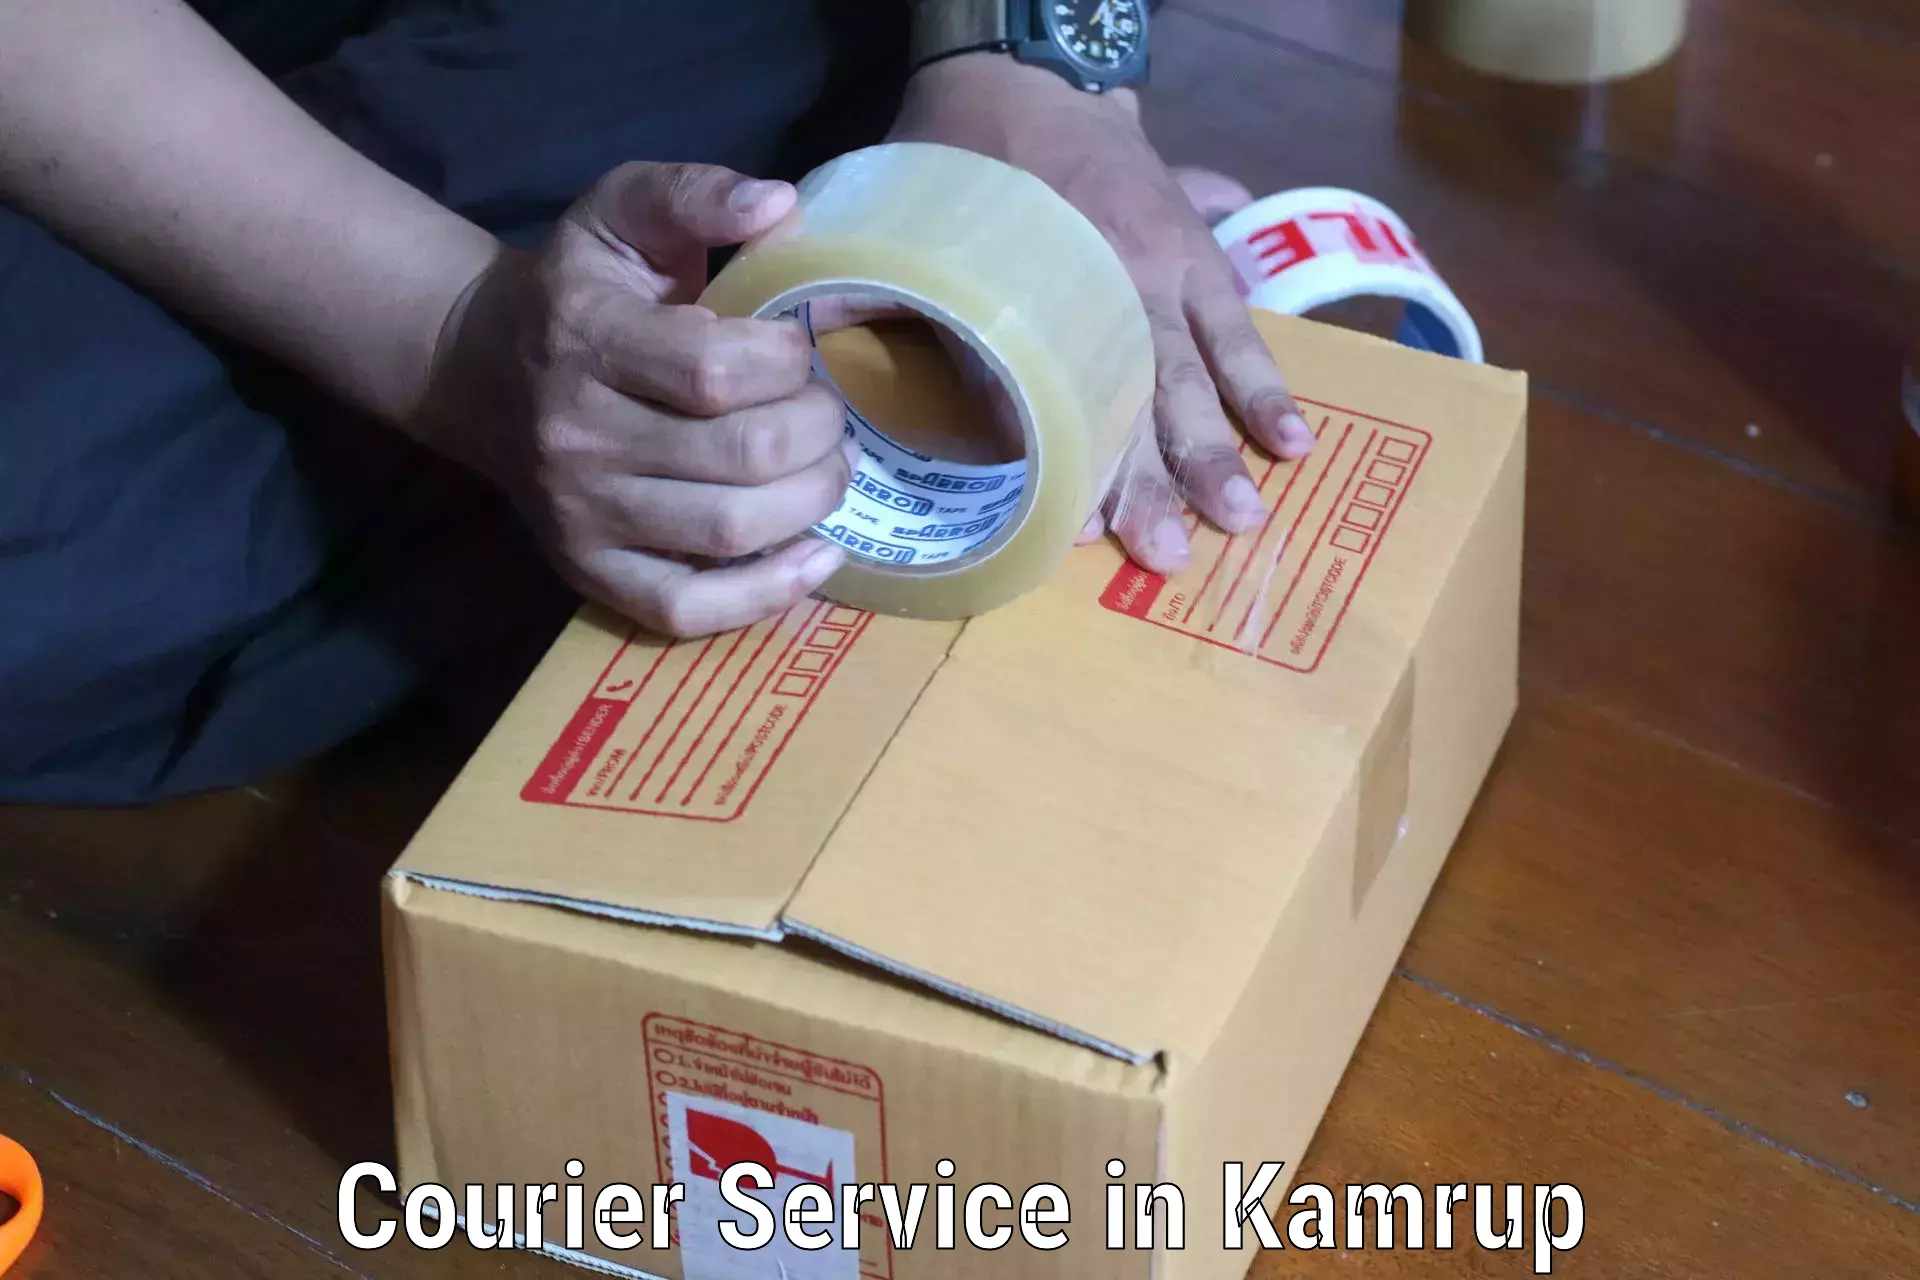 Advanced parcel tracking in Kamrup